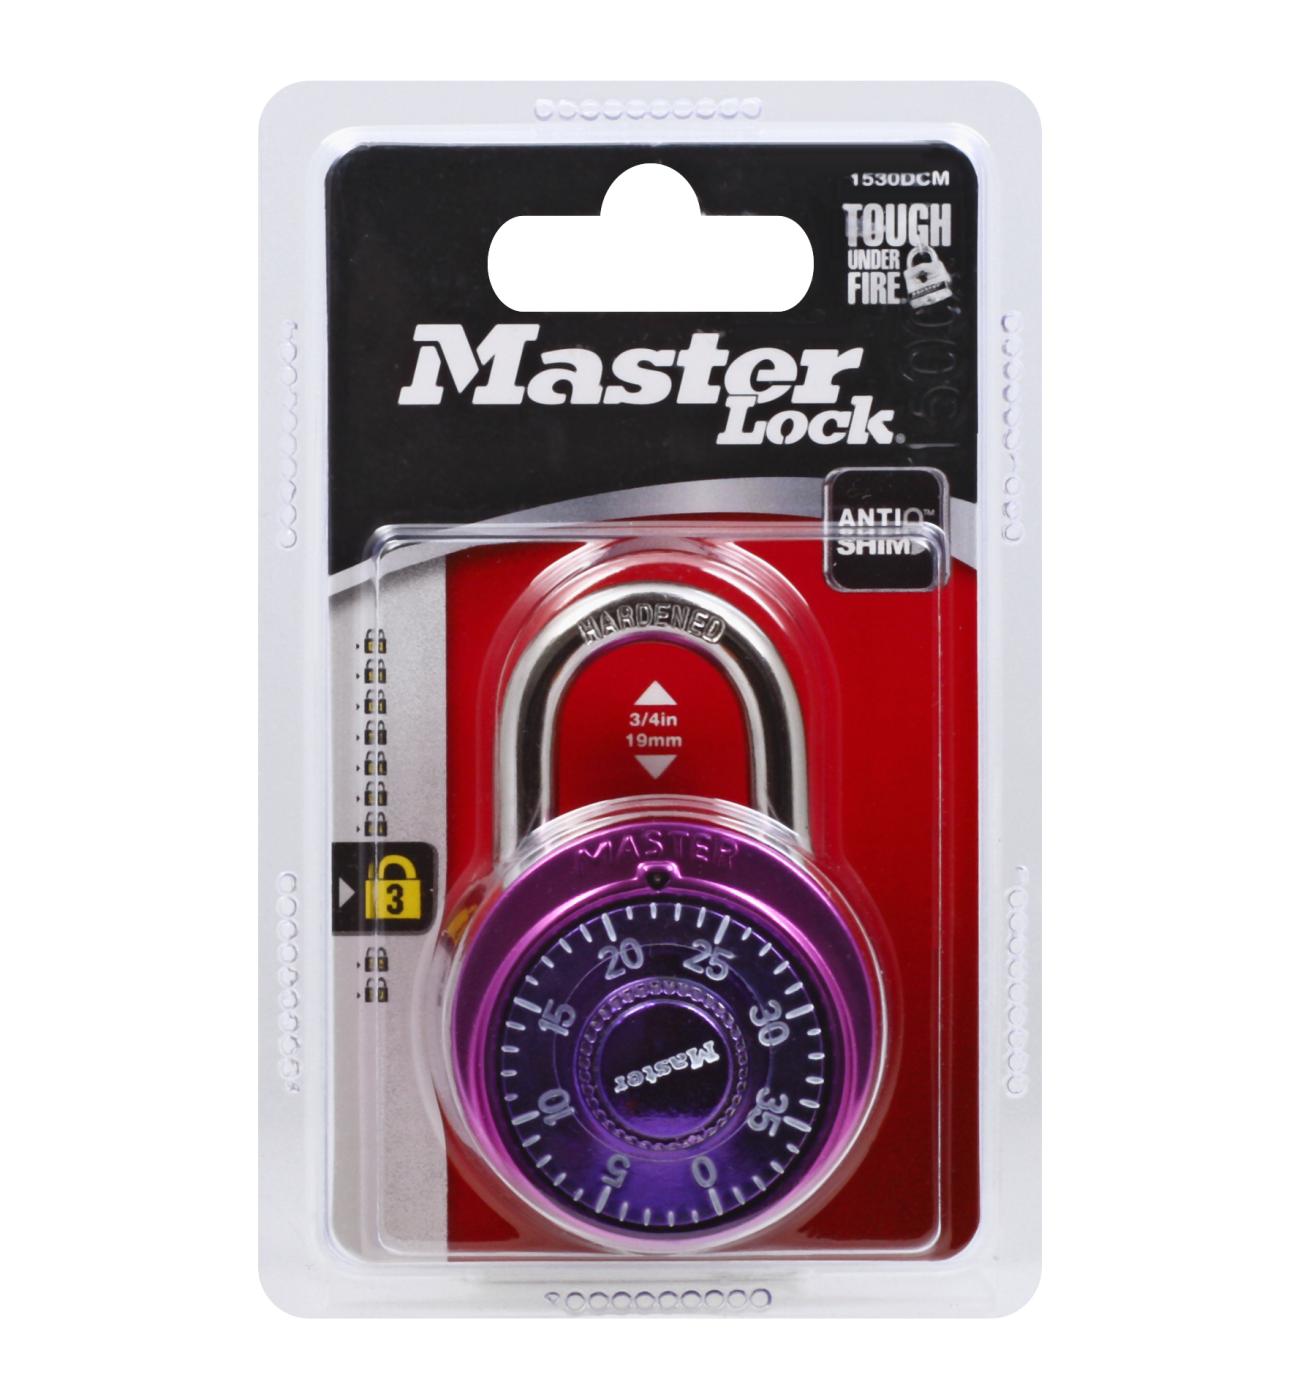 Master Lock 1530DCM Combination Lock - Assorted Colors; image 1 of 3